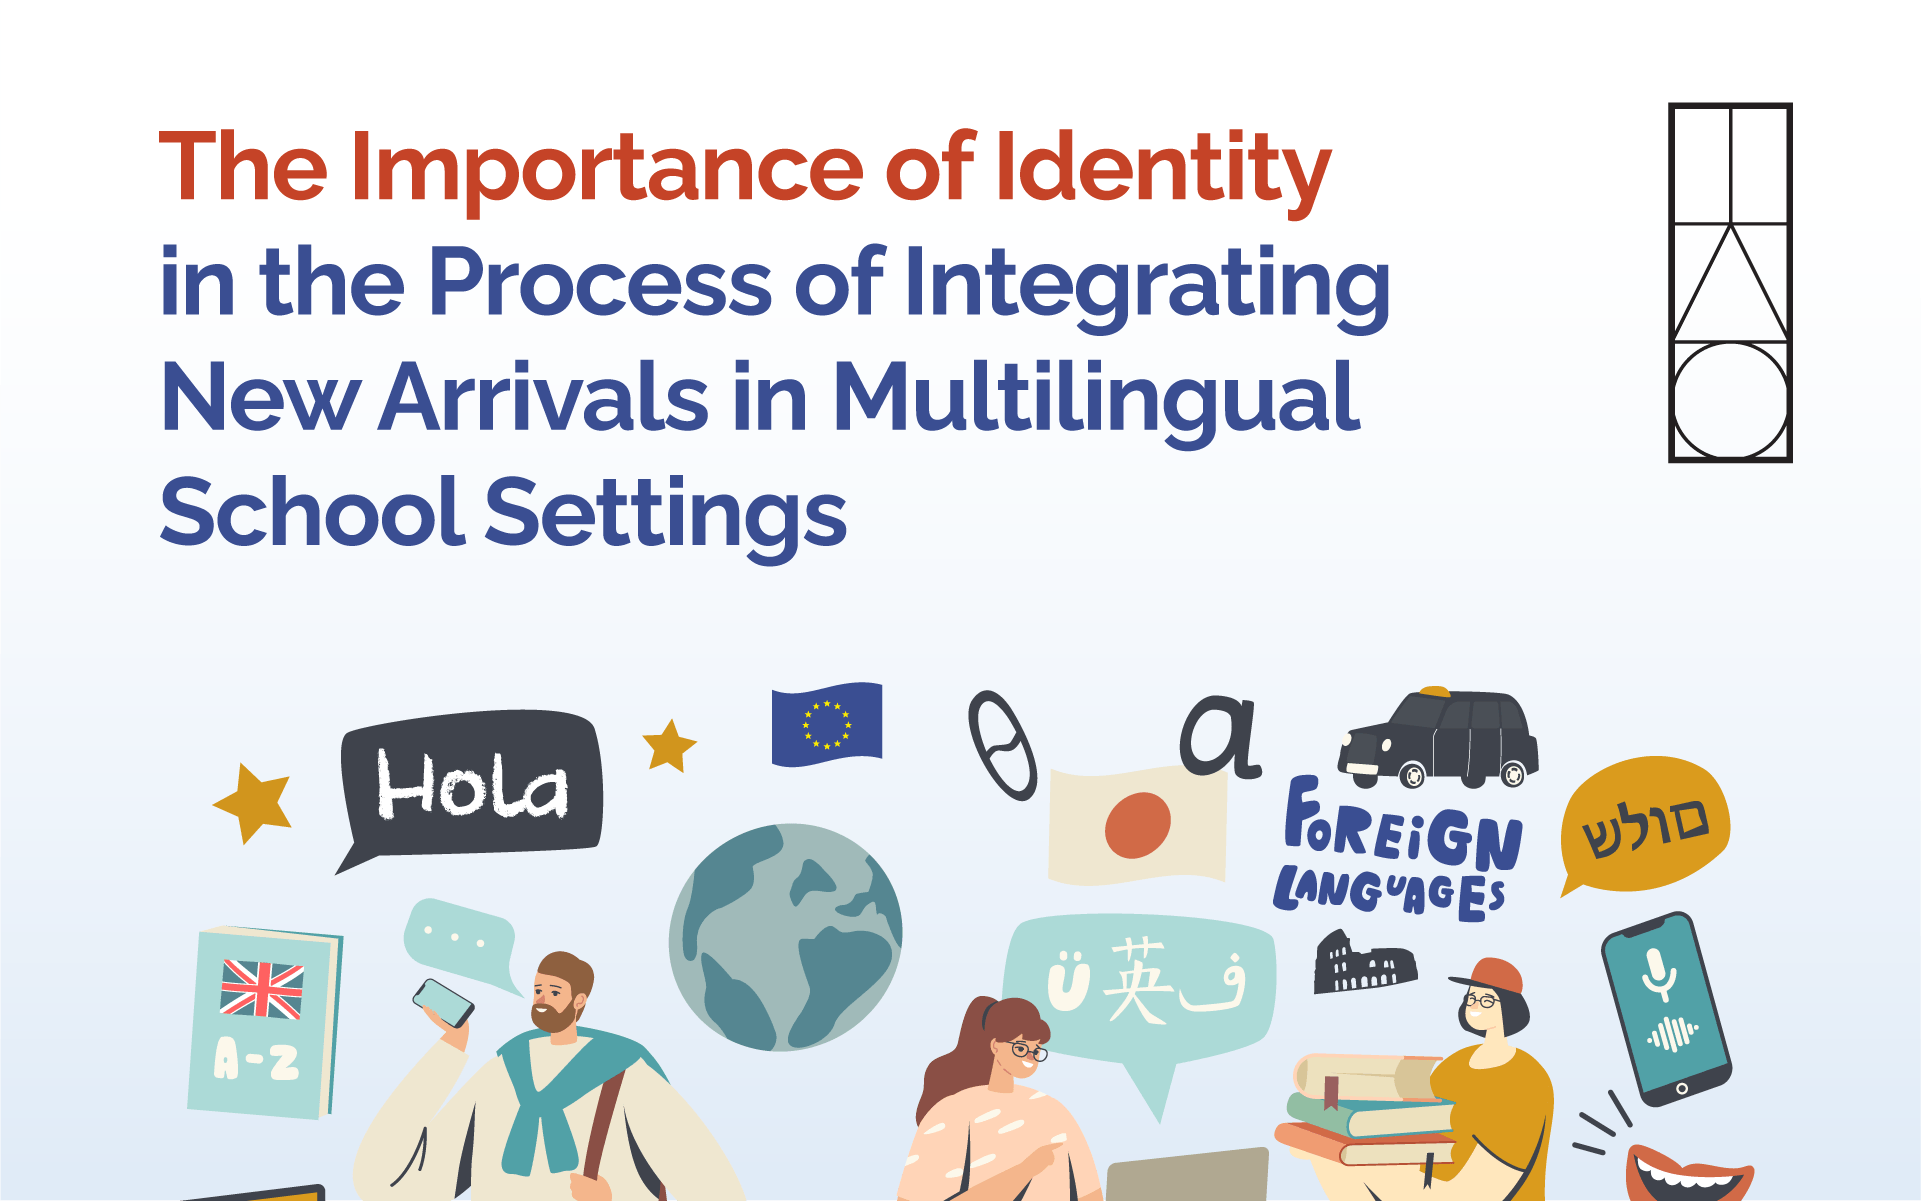 The Importance of Identity in the Process of Integrating New Arrivals in Multilingual School Settings